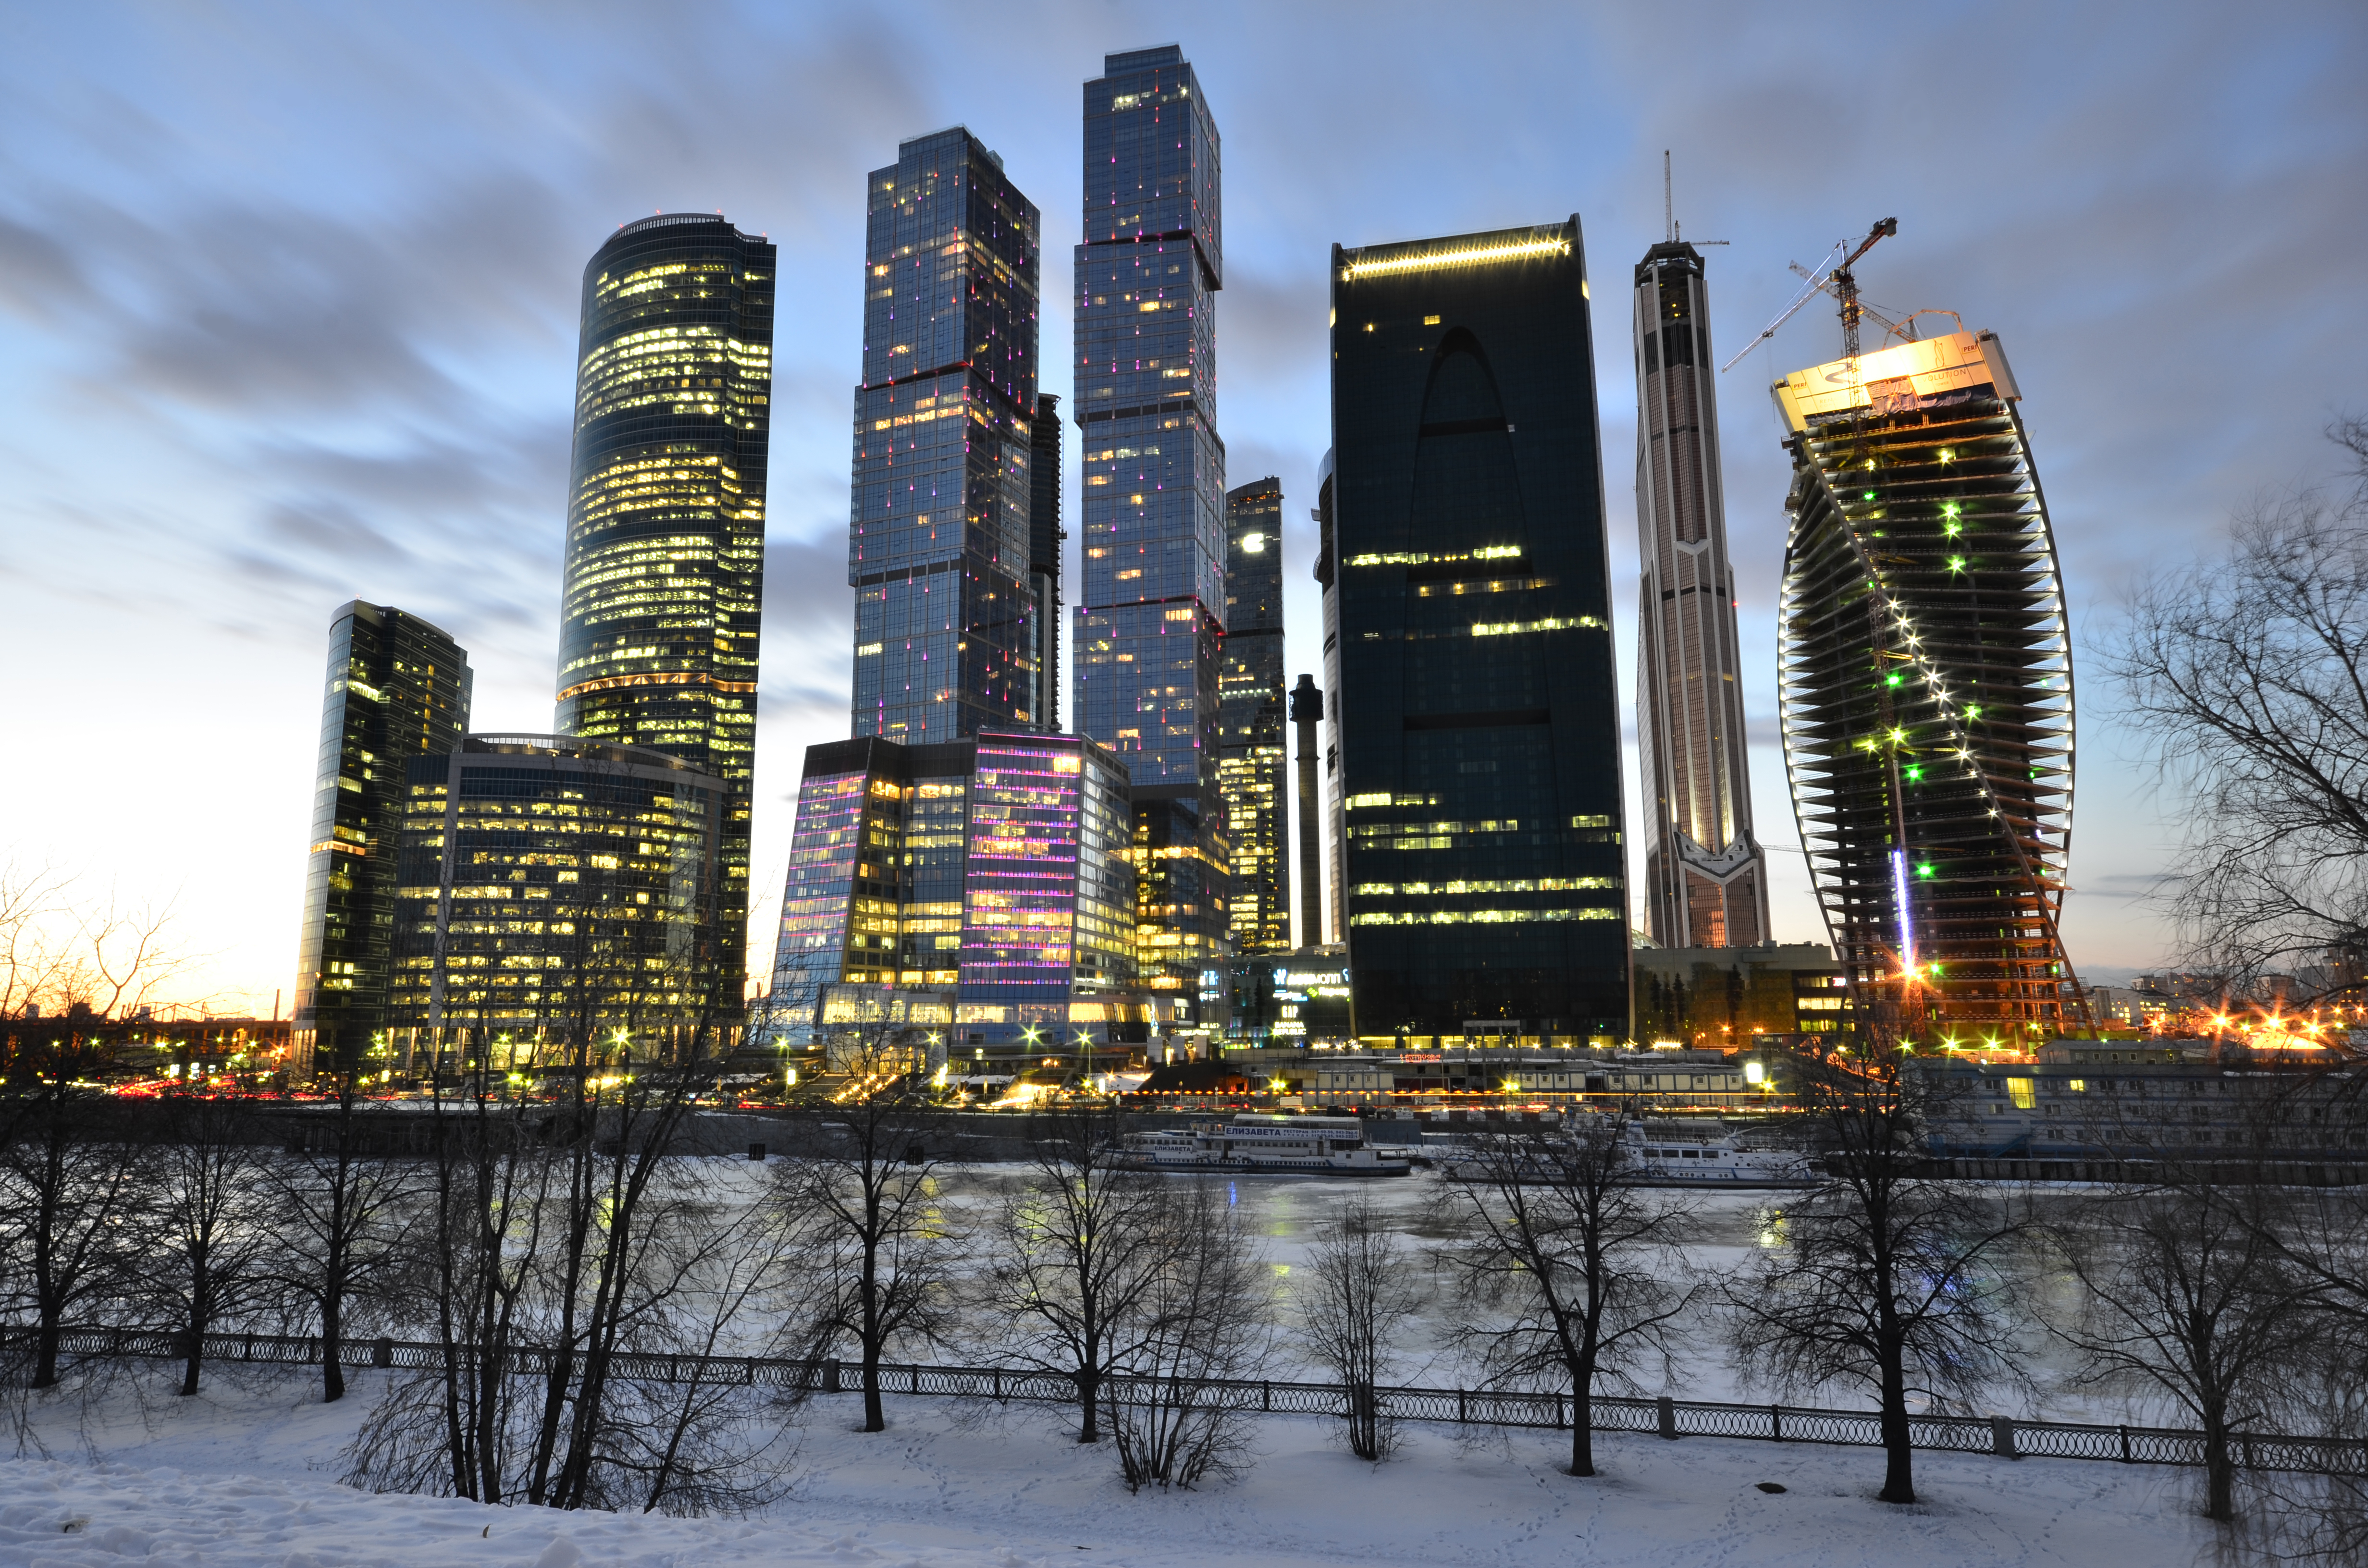 File:Moscow City 2013.jpg - Wikimedia Commons